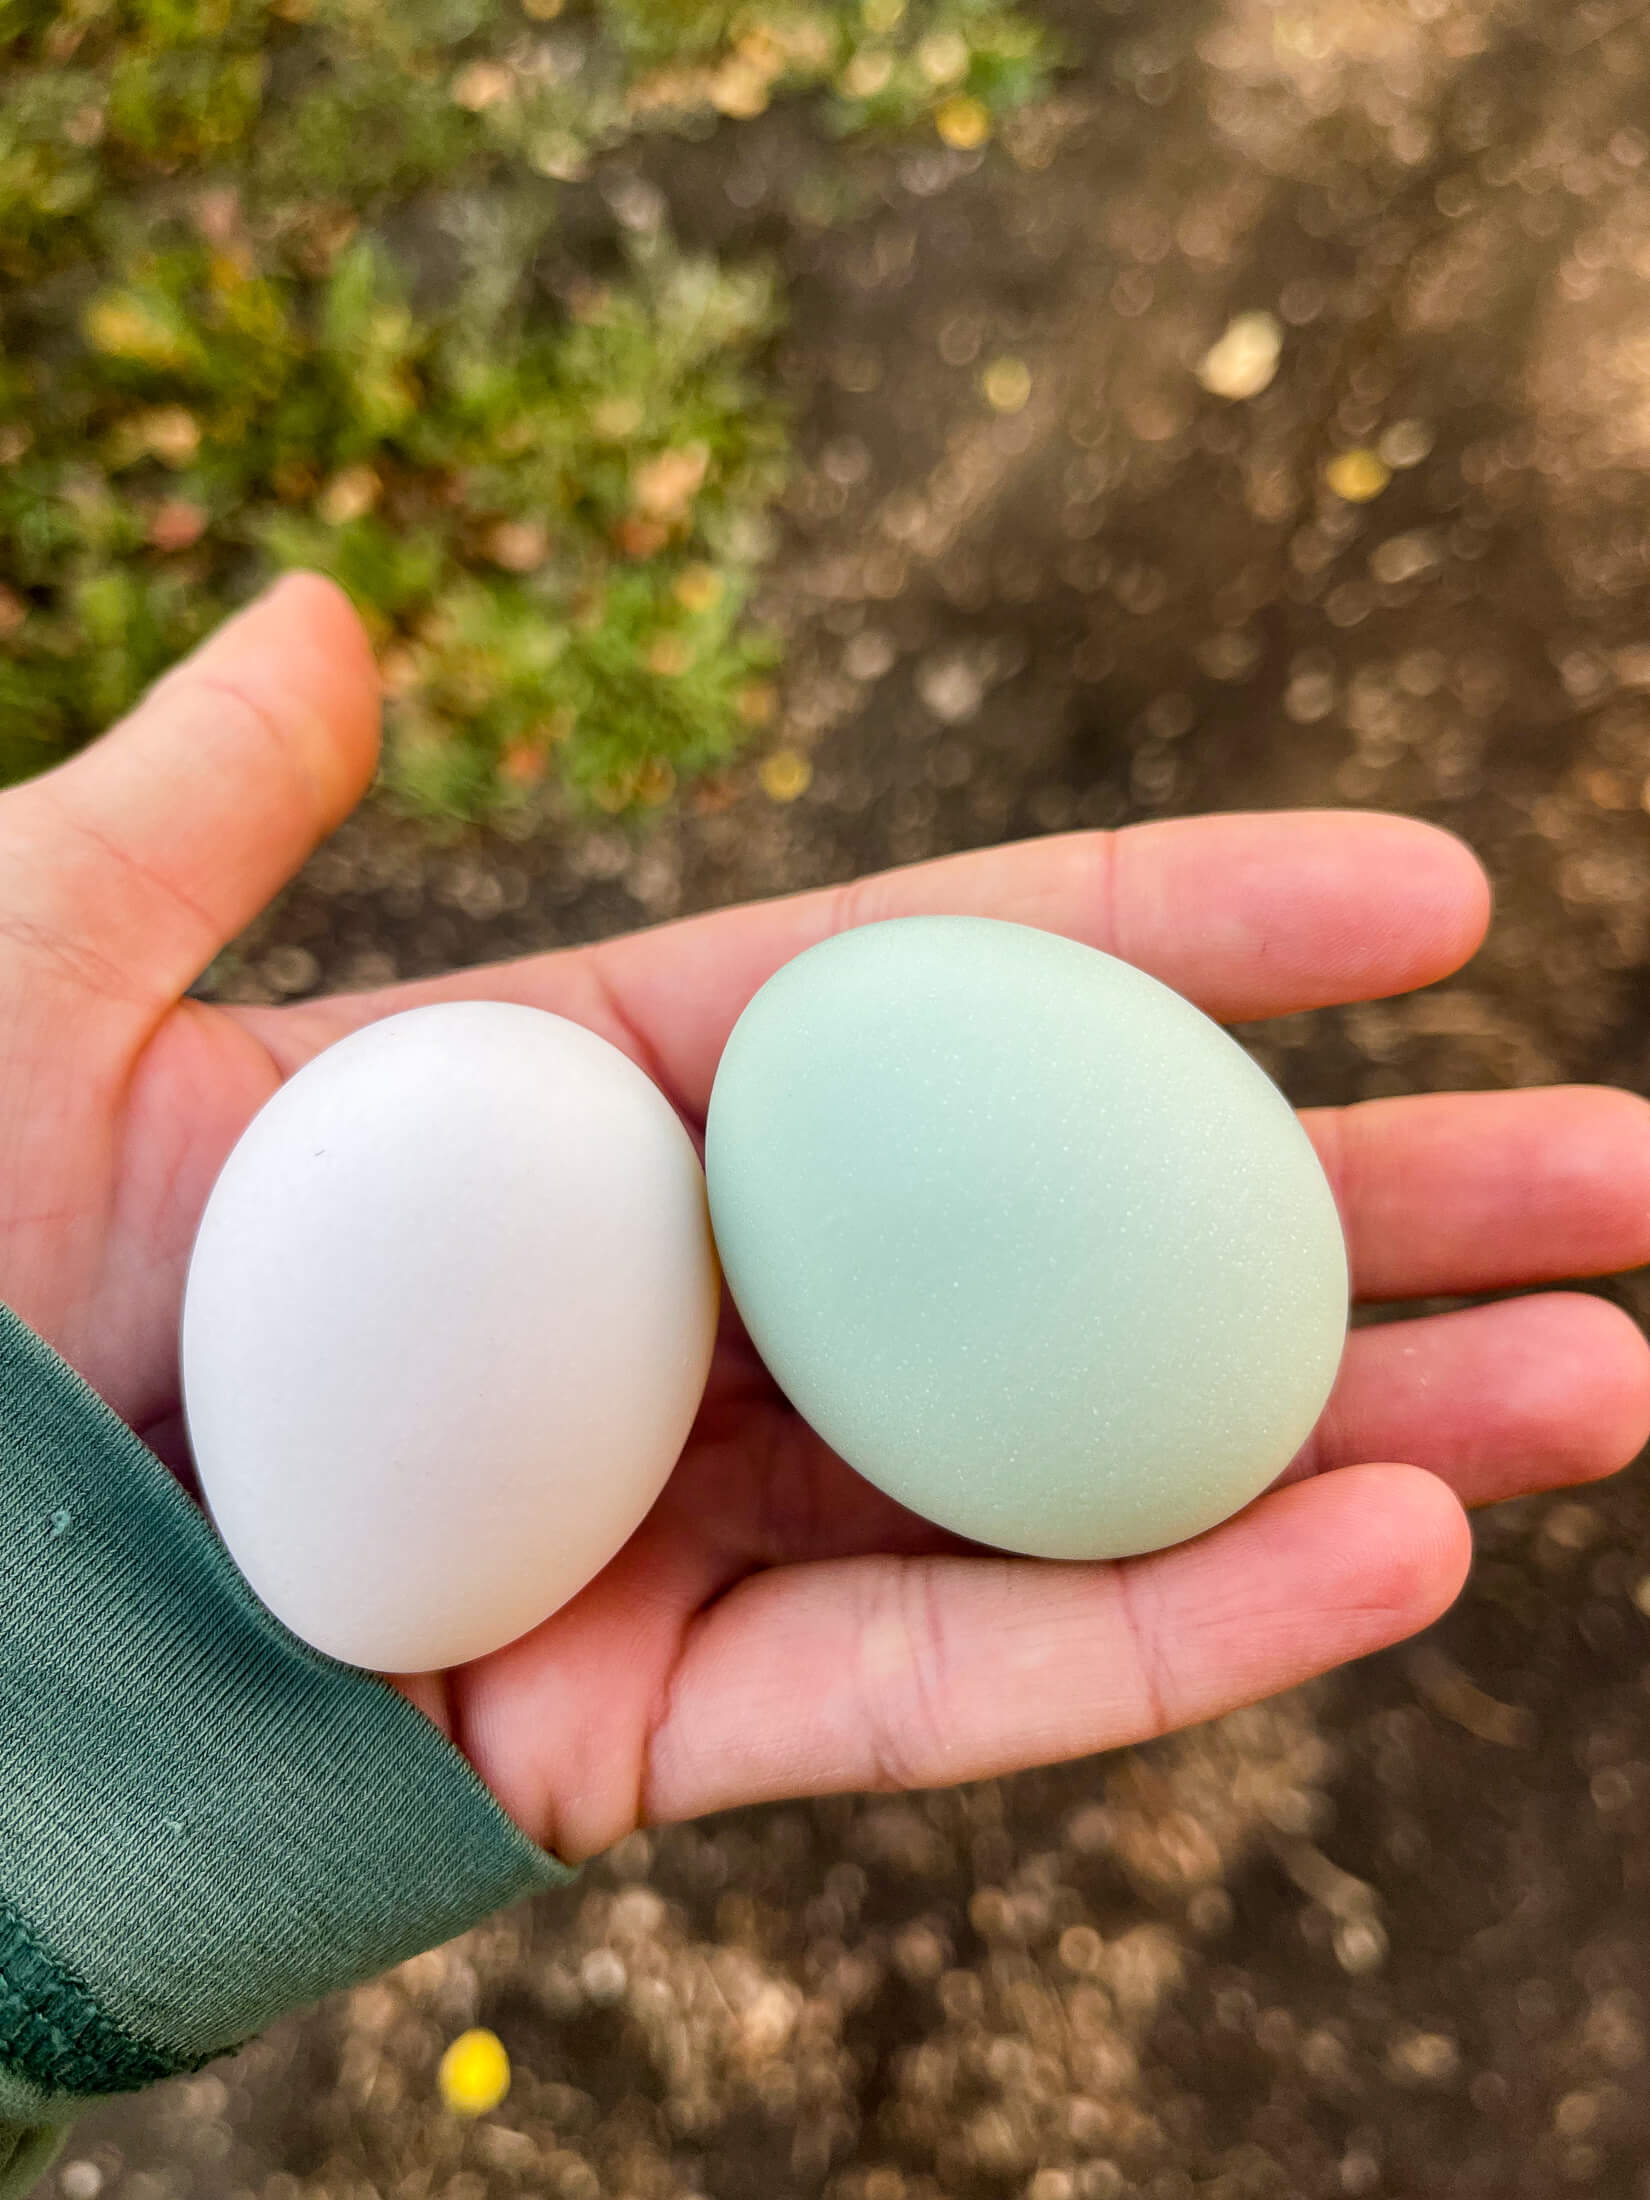 White and green eggs. 
